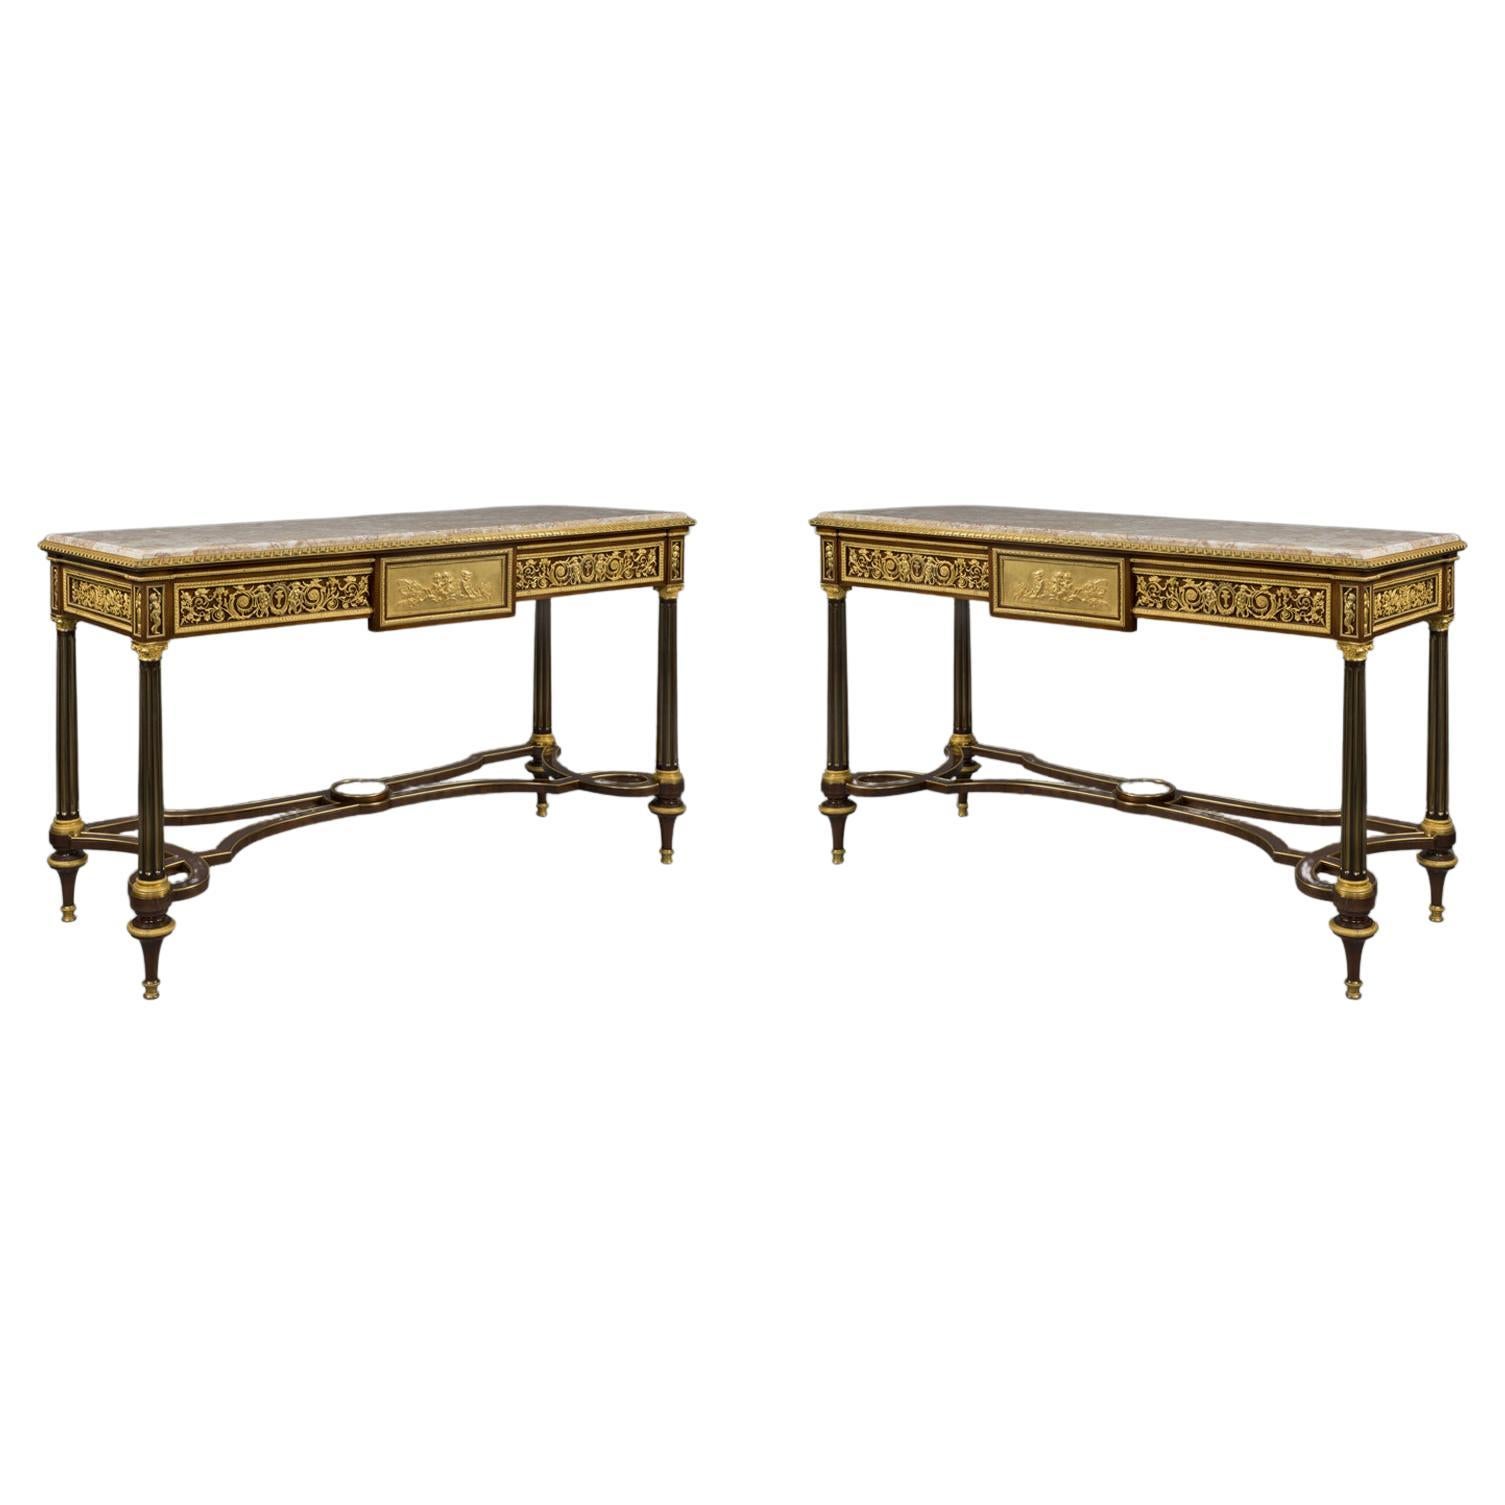 Fine Pair of Gilt-Bronze Mounted Mahogany Console Tables